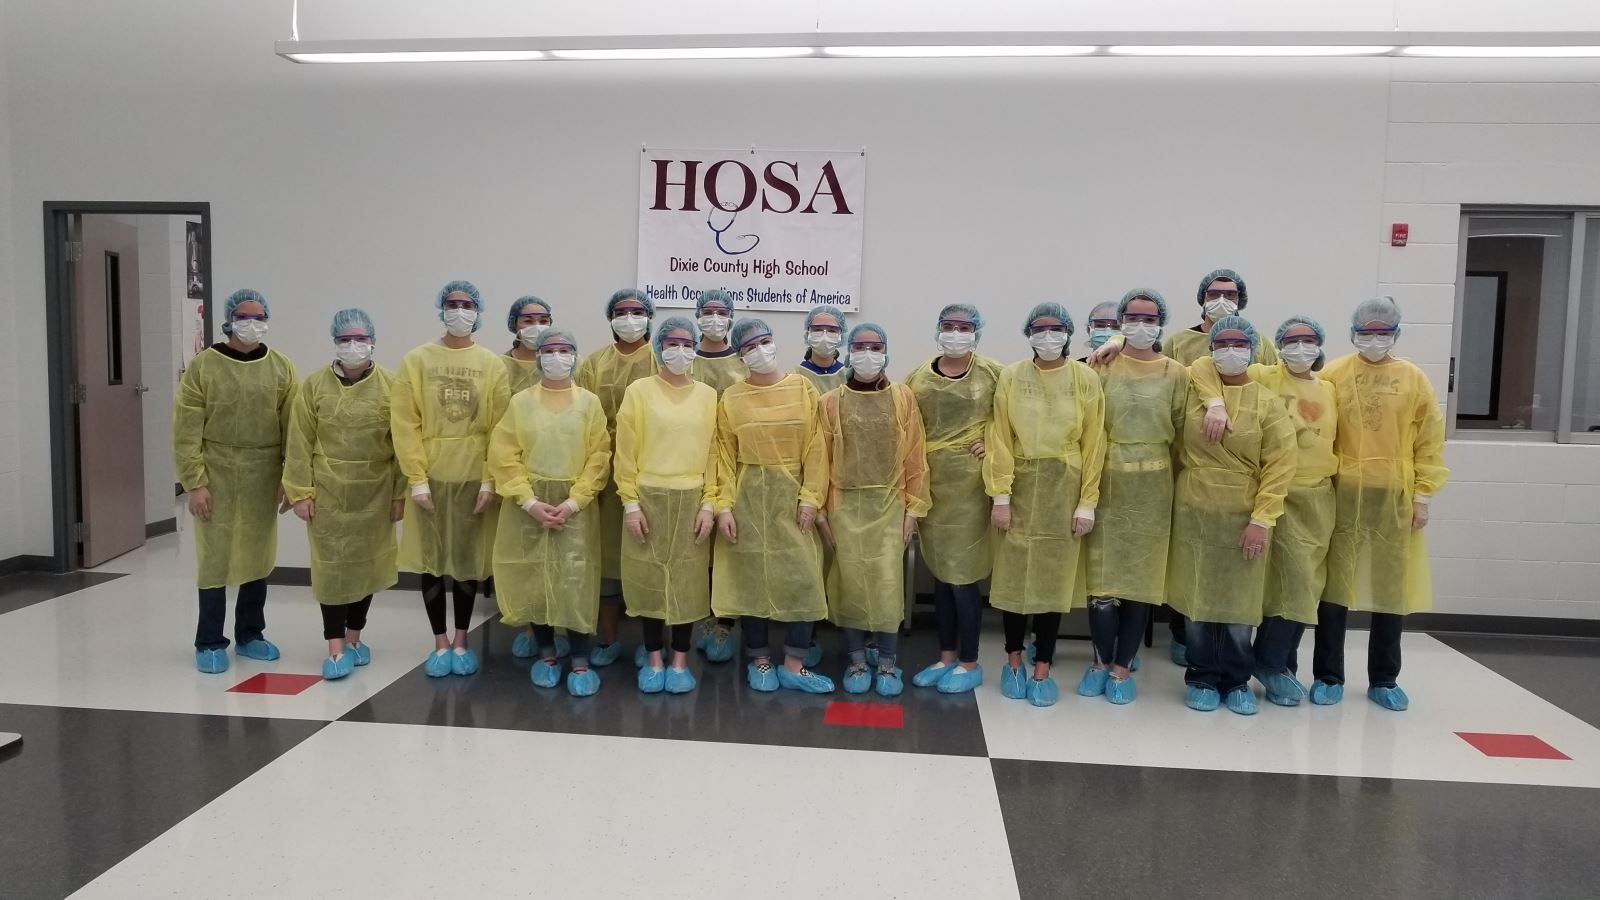 a group of people wearing safety gowns and masks are posing for a picture .